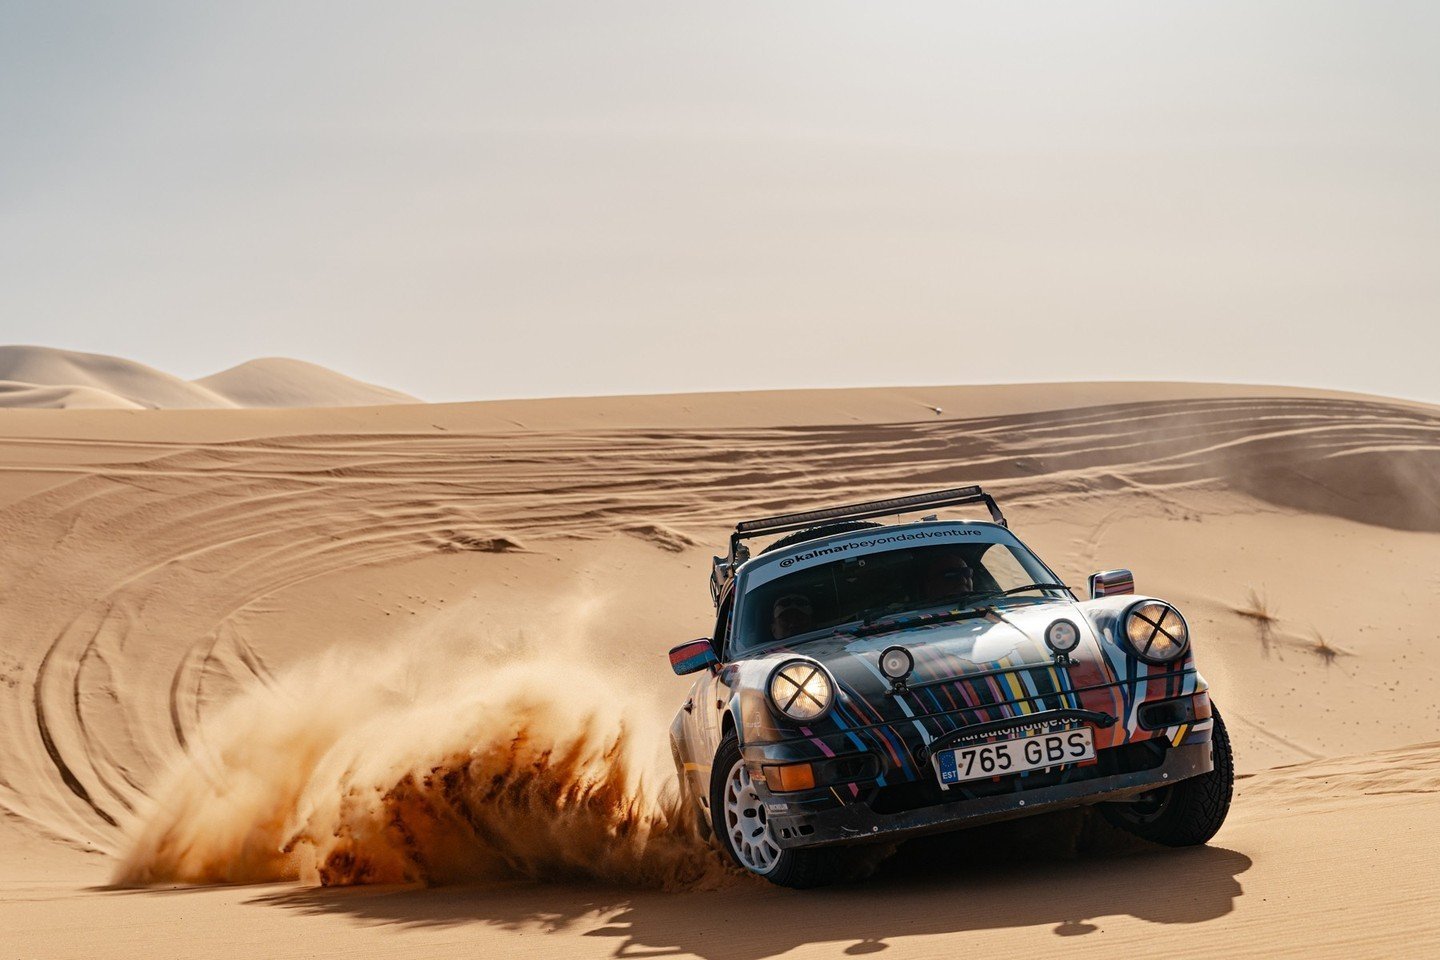 Most &ldquo;Safari&rdquo; spec Porsches may never go further off-road than a country club car park, but those built by @kalmarautomotive are set for an incredible African adventure in 2025.⁠
⁠
The Danish company, which specialises in converting air a